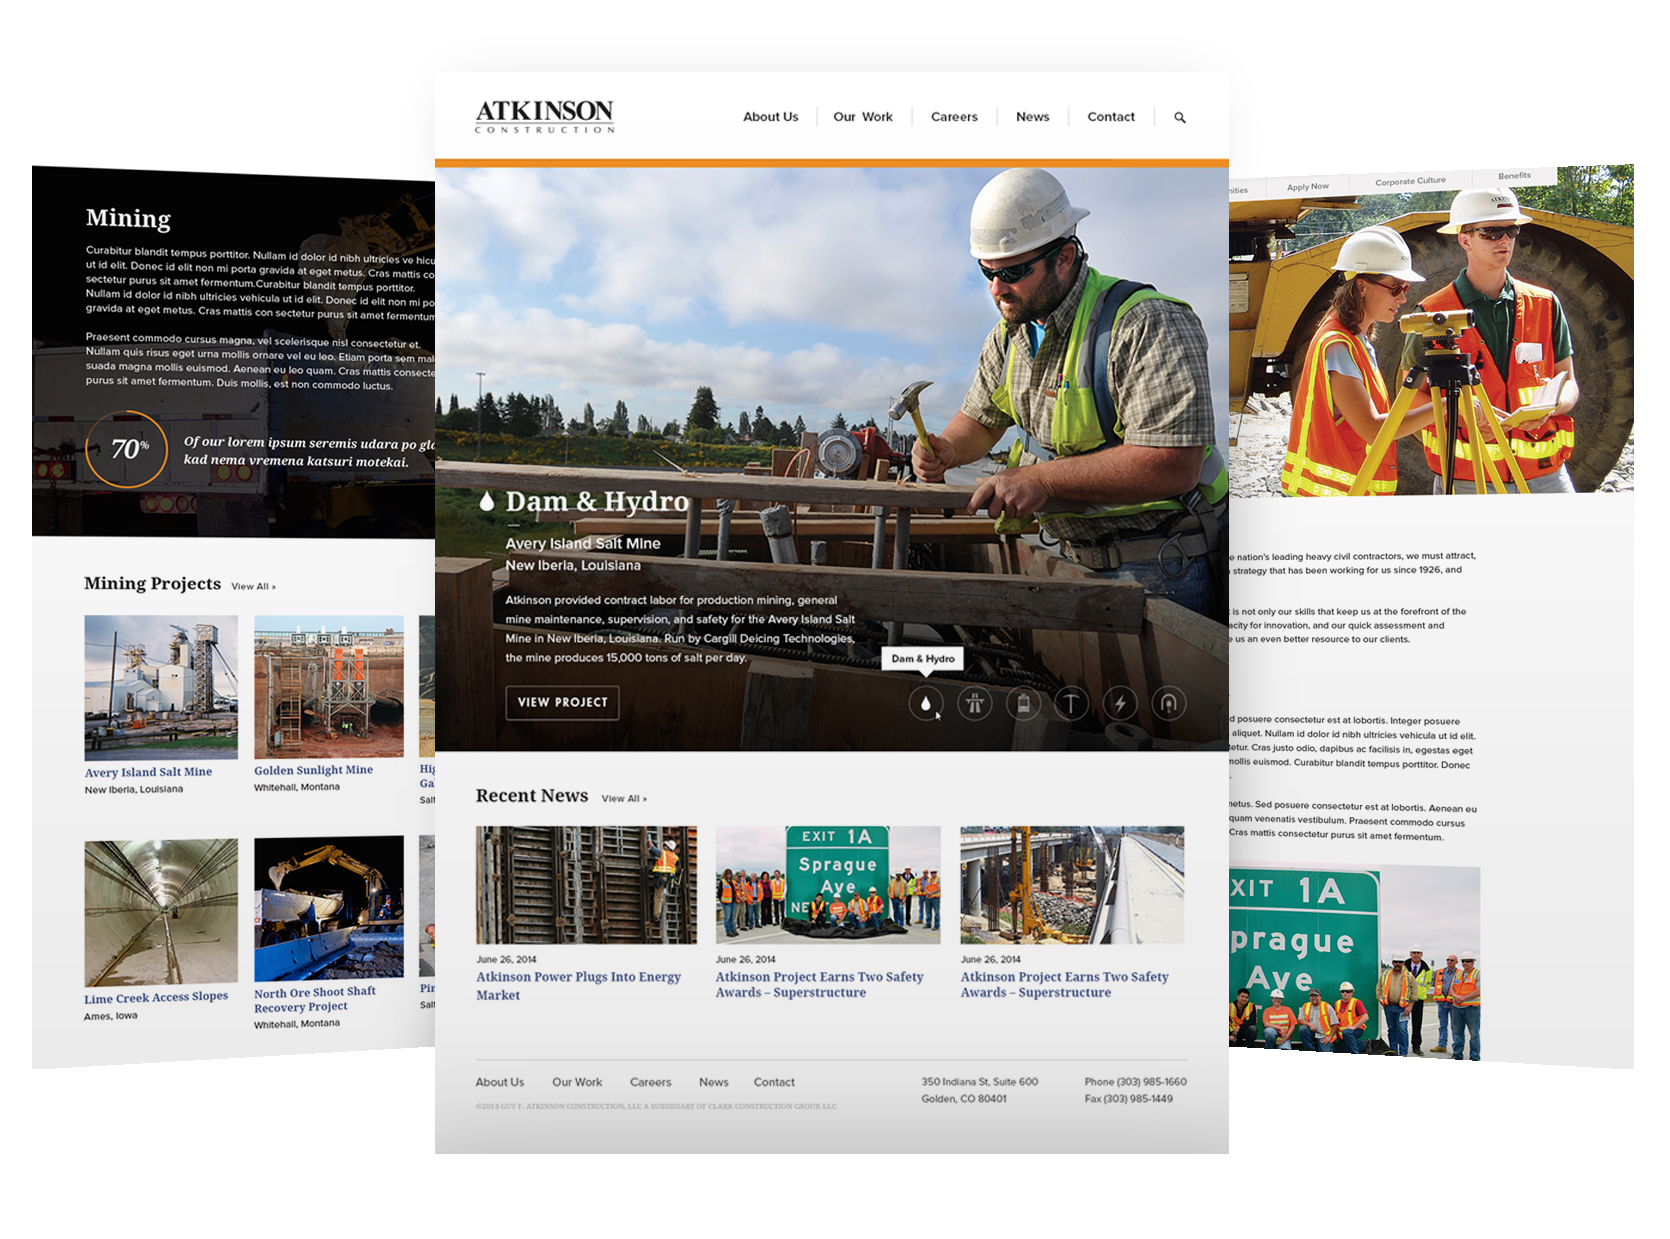 We worked with the Marylany based Clark Construction to redesign the Atkinson site.